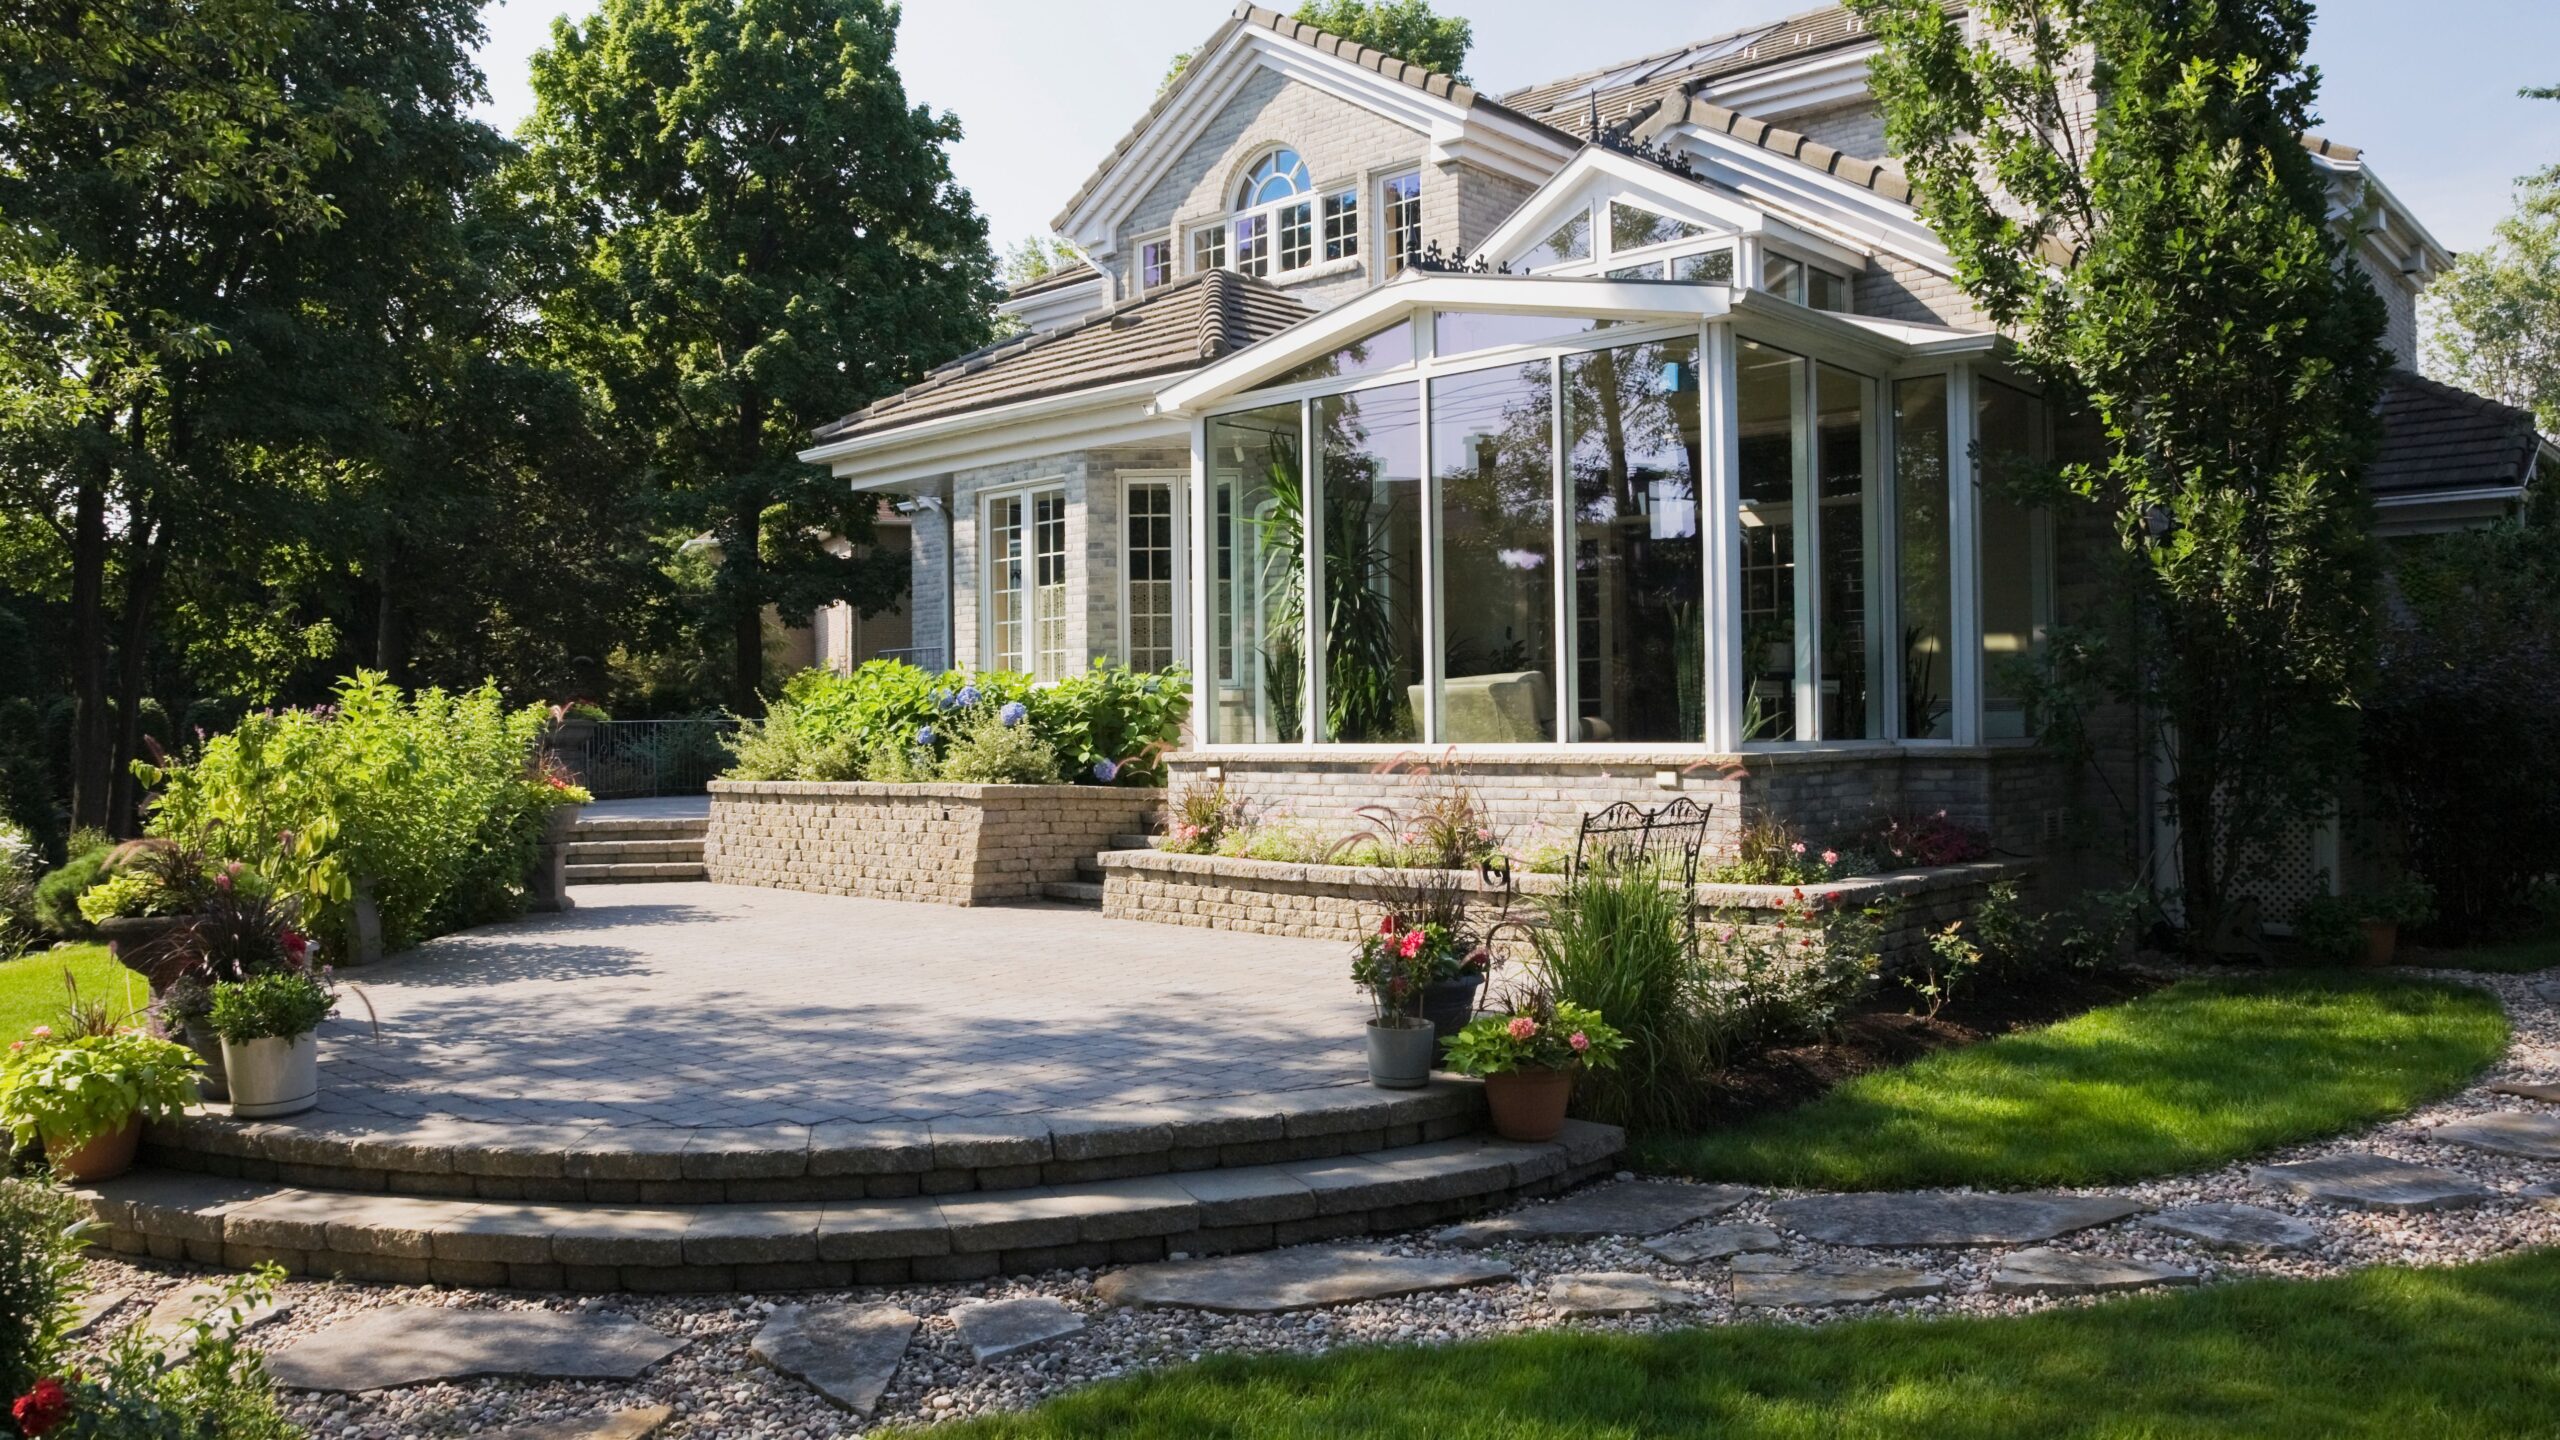 Add a sunroom to create an indoor or outdoor living space